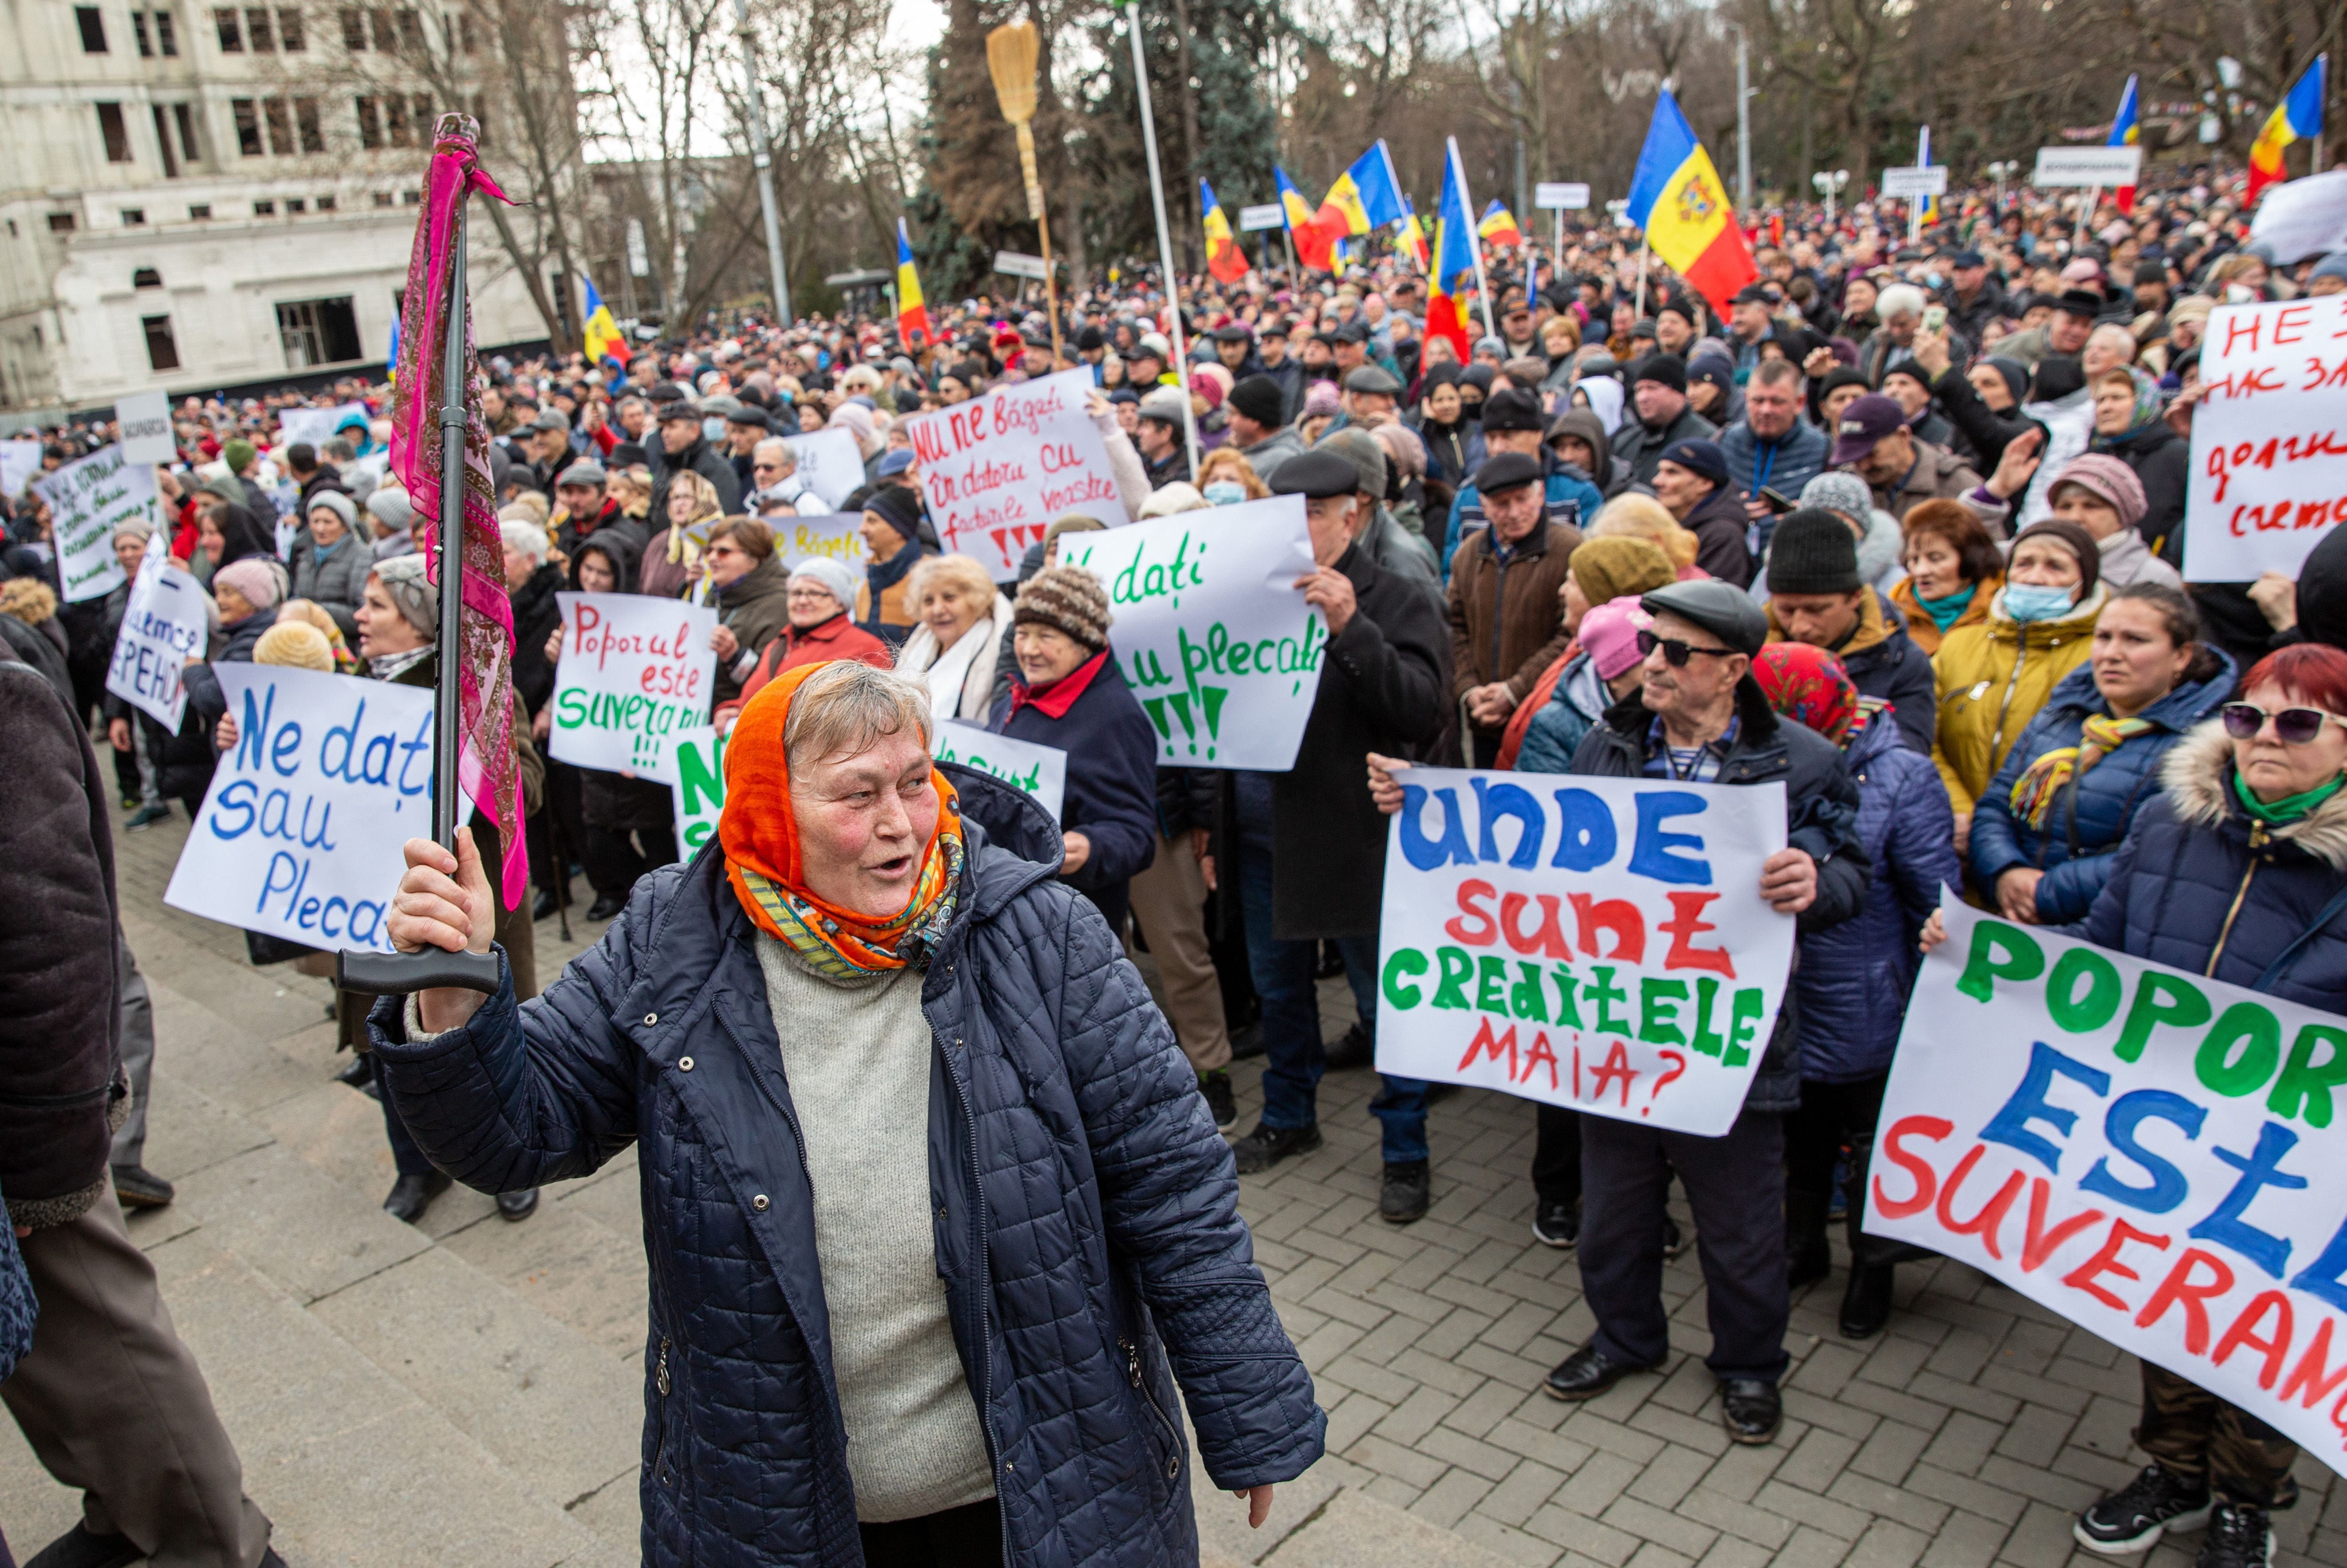 People take part in a protest against the Moldovan government and its pro-European Union president in Chisinau on February 19, 2023. (Photo: Elena COVALENCO / AFP).